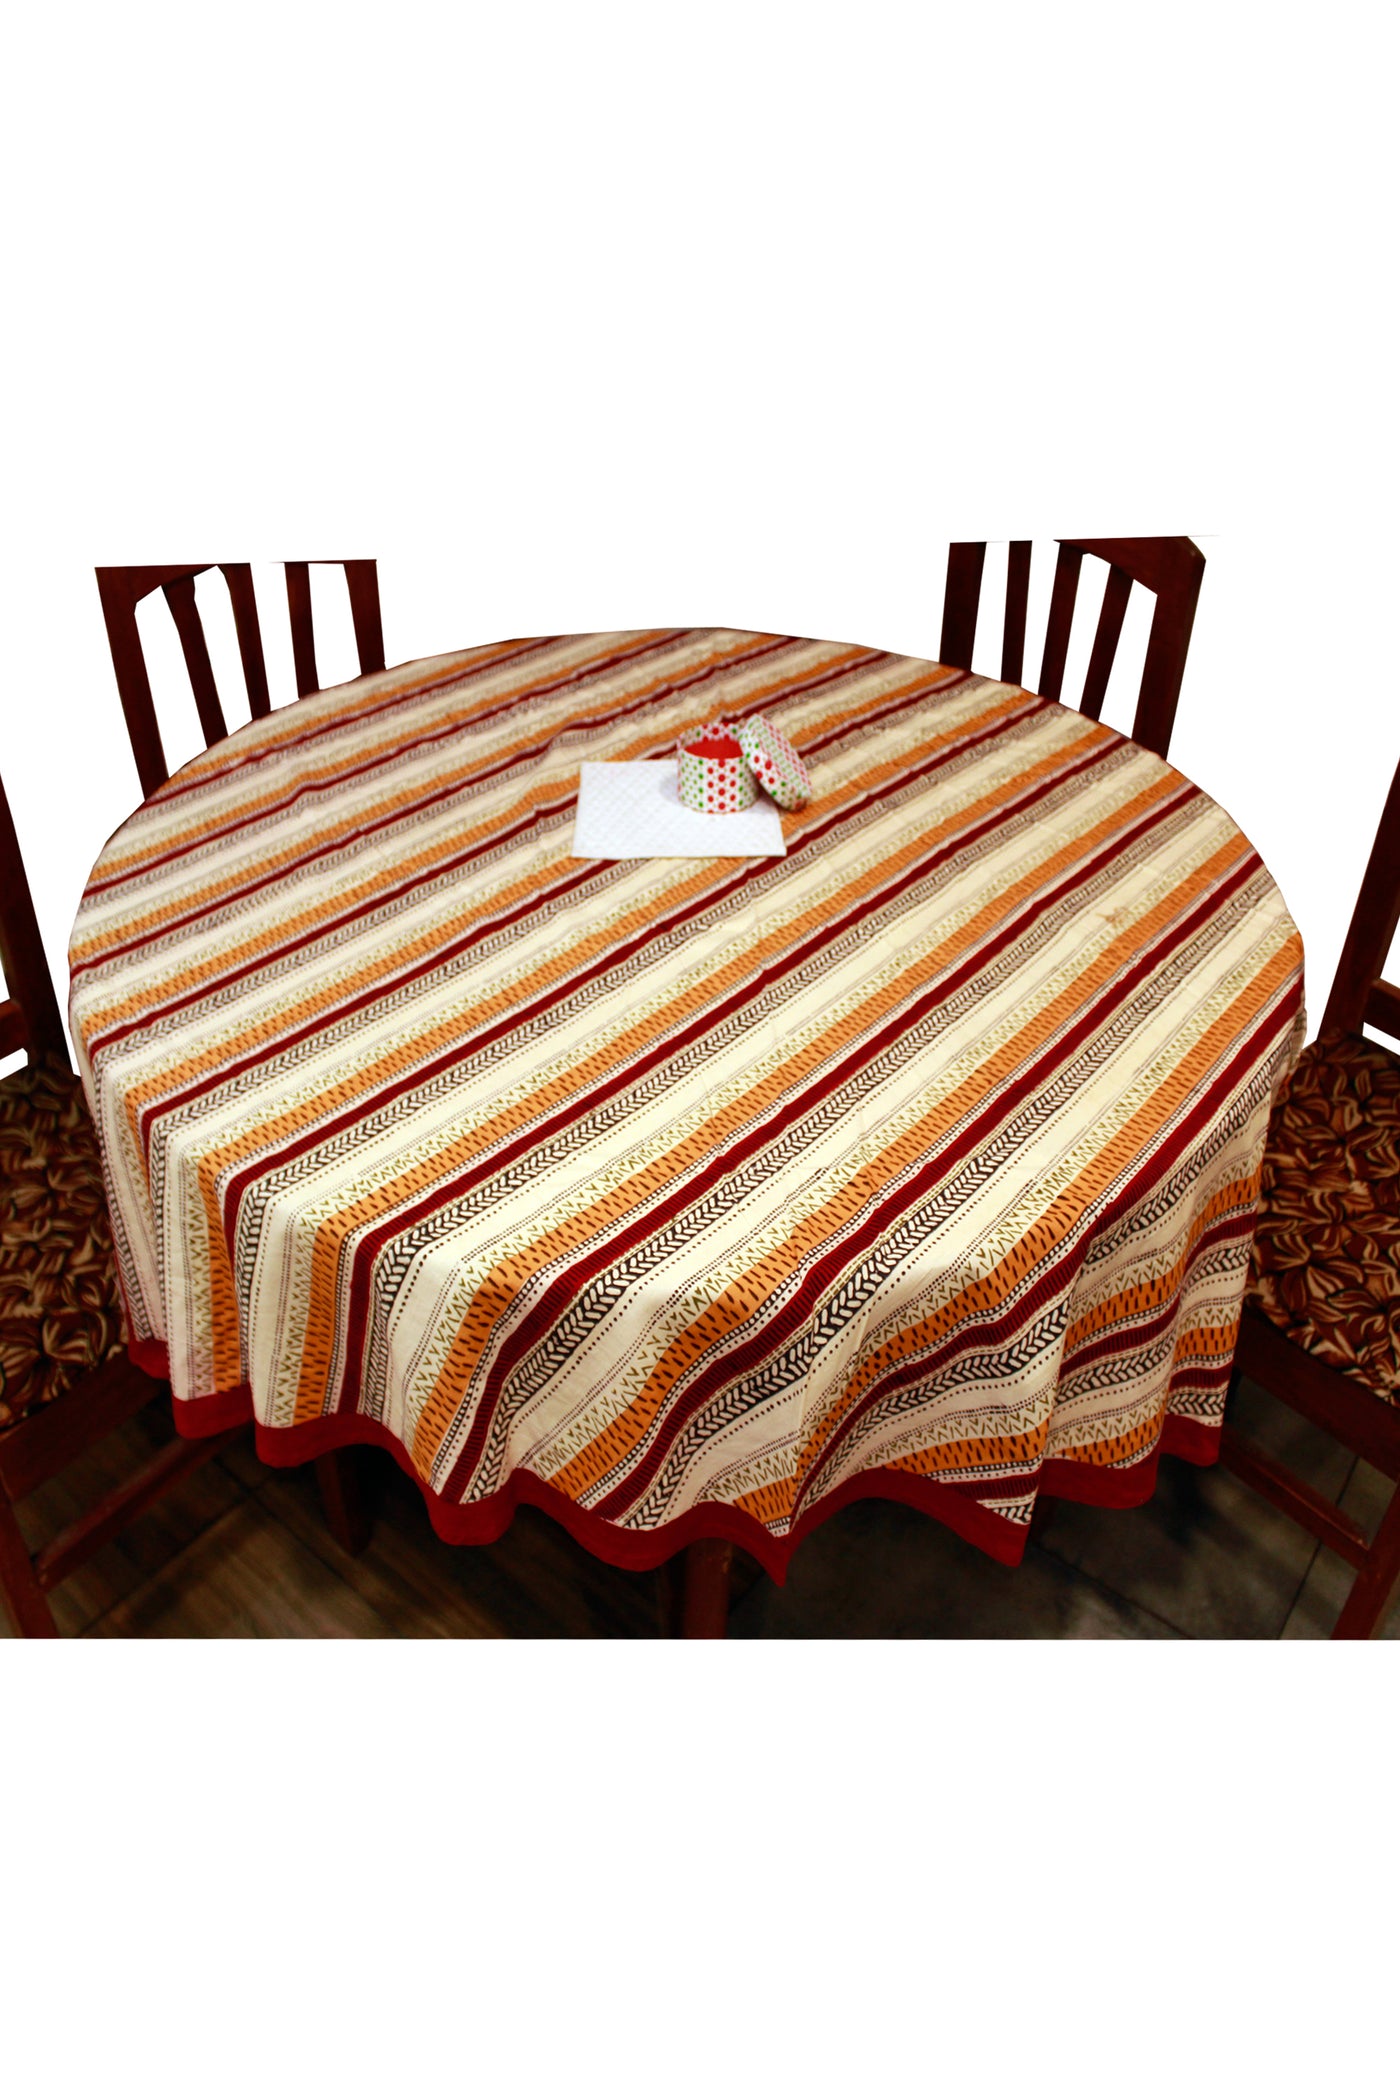 Round Table Cover Roaster Border Print in Red